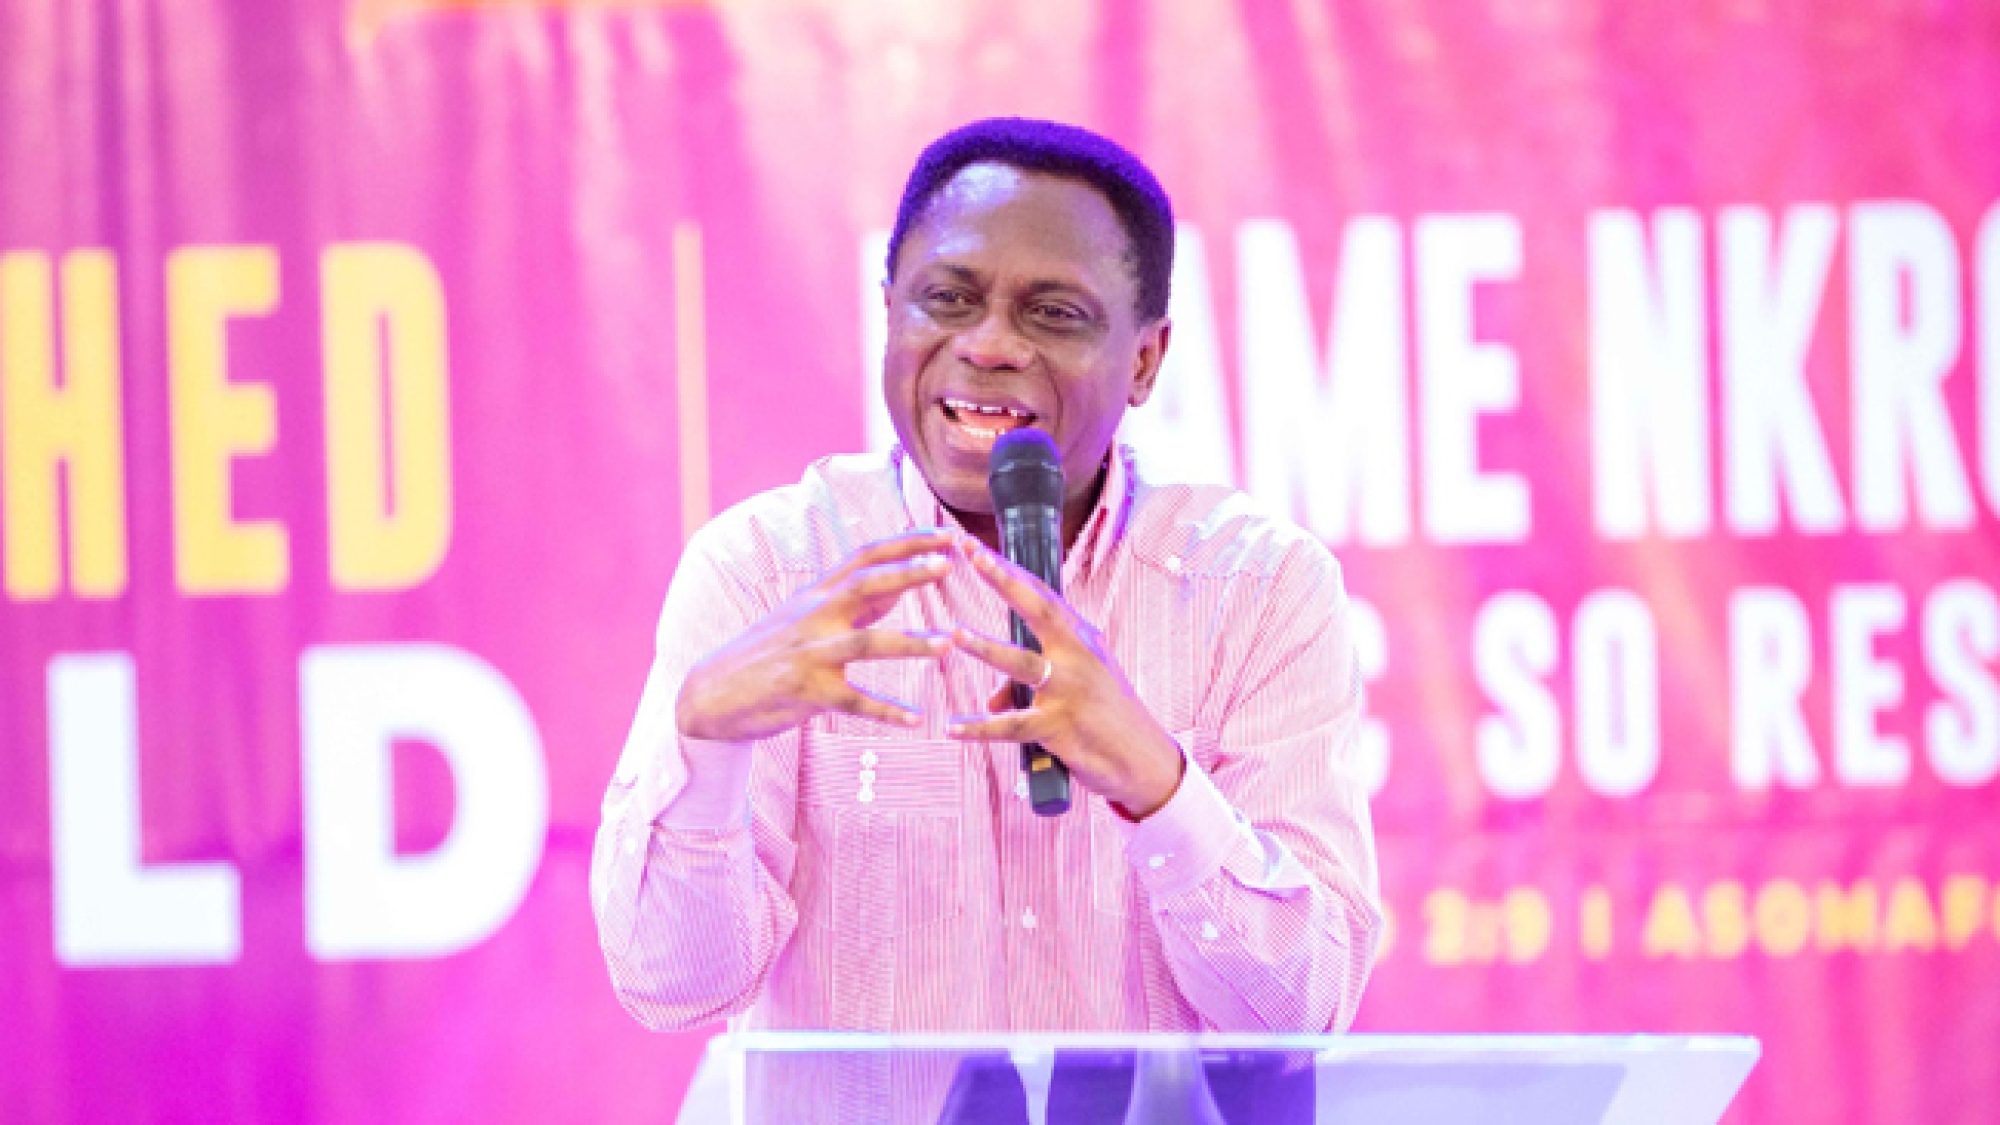 Follow Systems, Adapt To Change – Chairman Advises Church Leaders web